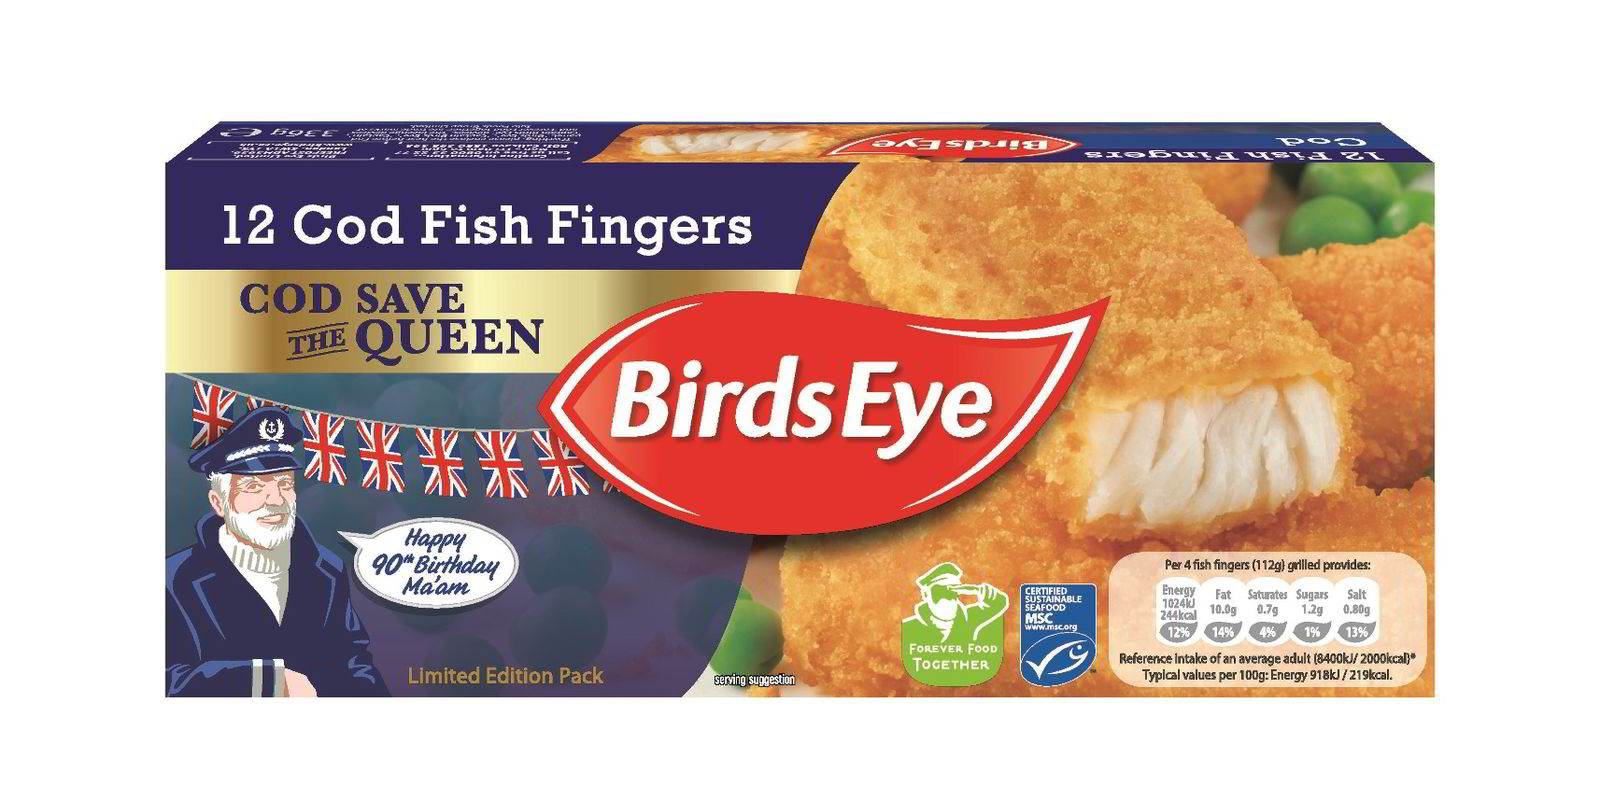 Birds Eye launches limited edition fish fingers to mark Queen's birthday